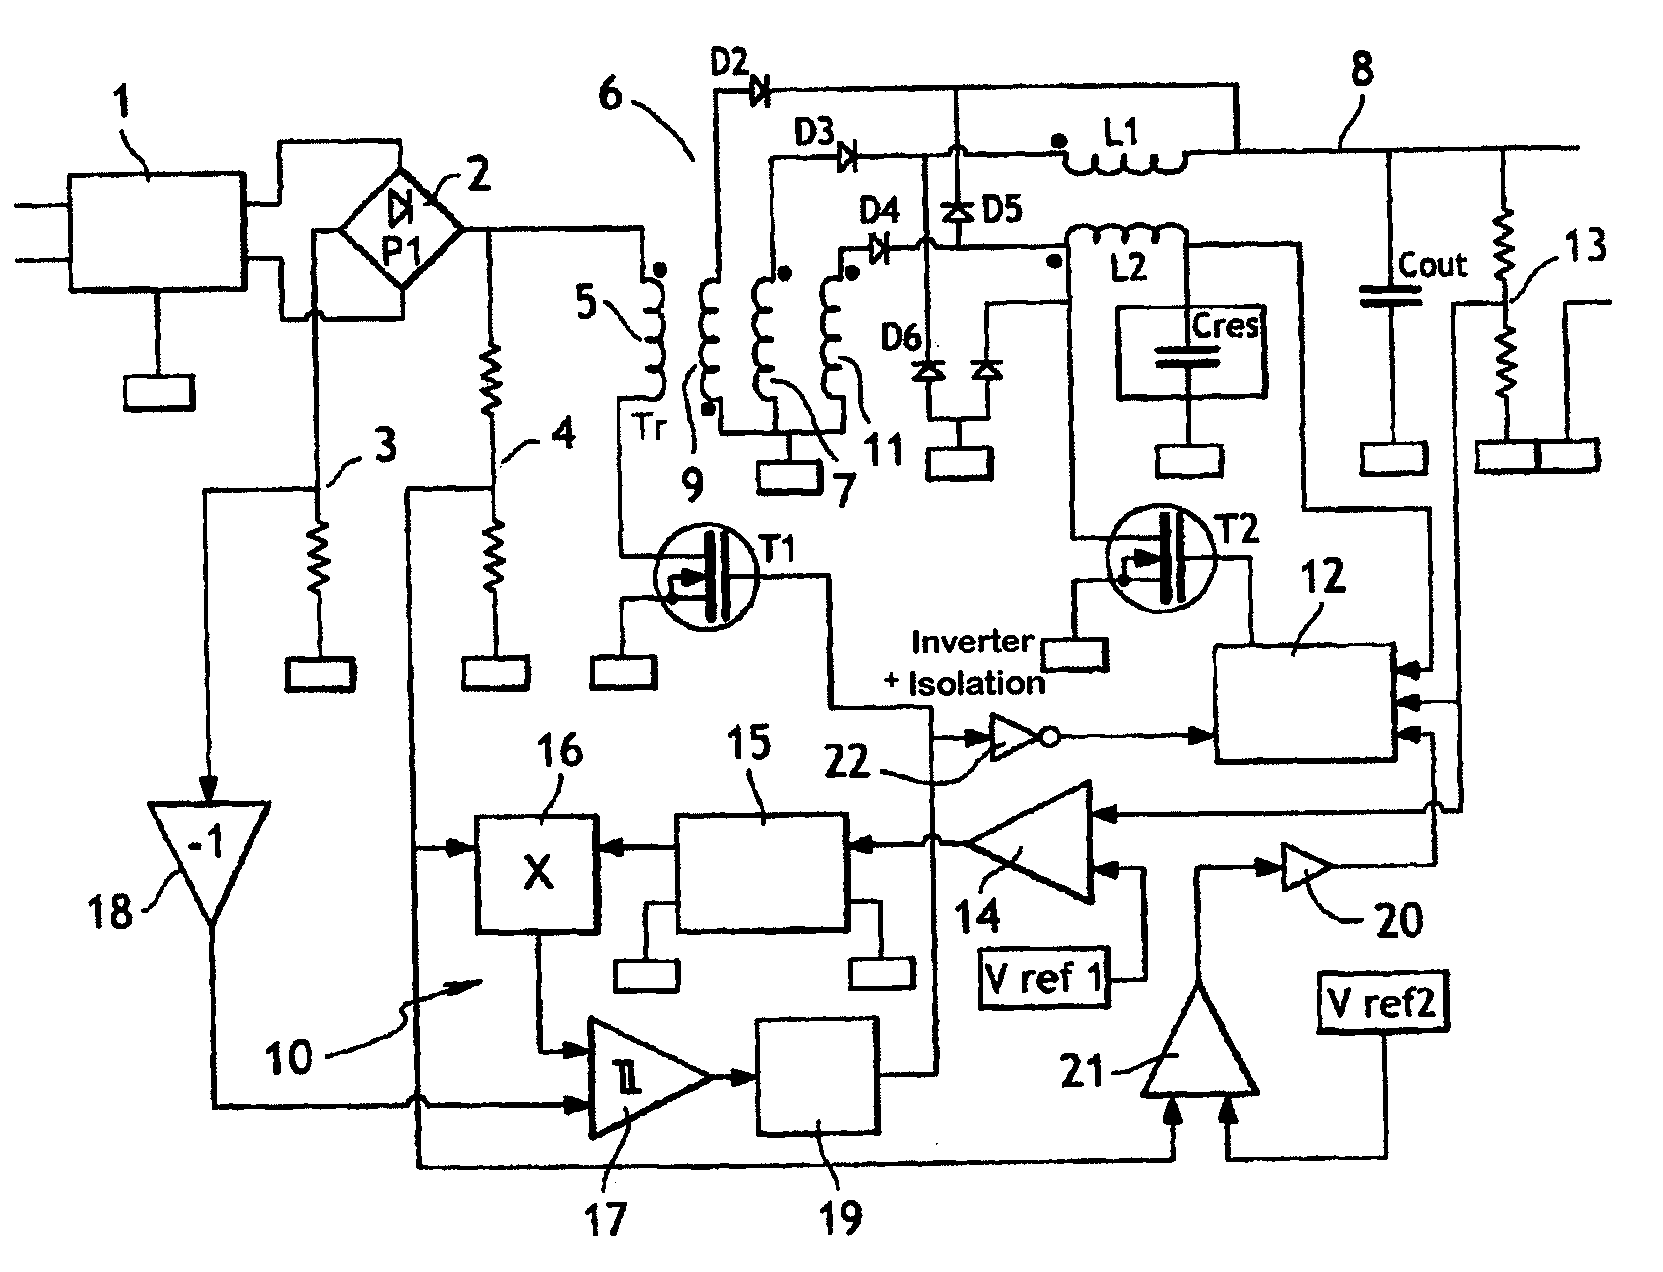 Electrically-isolated ac/dc converter